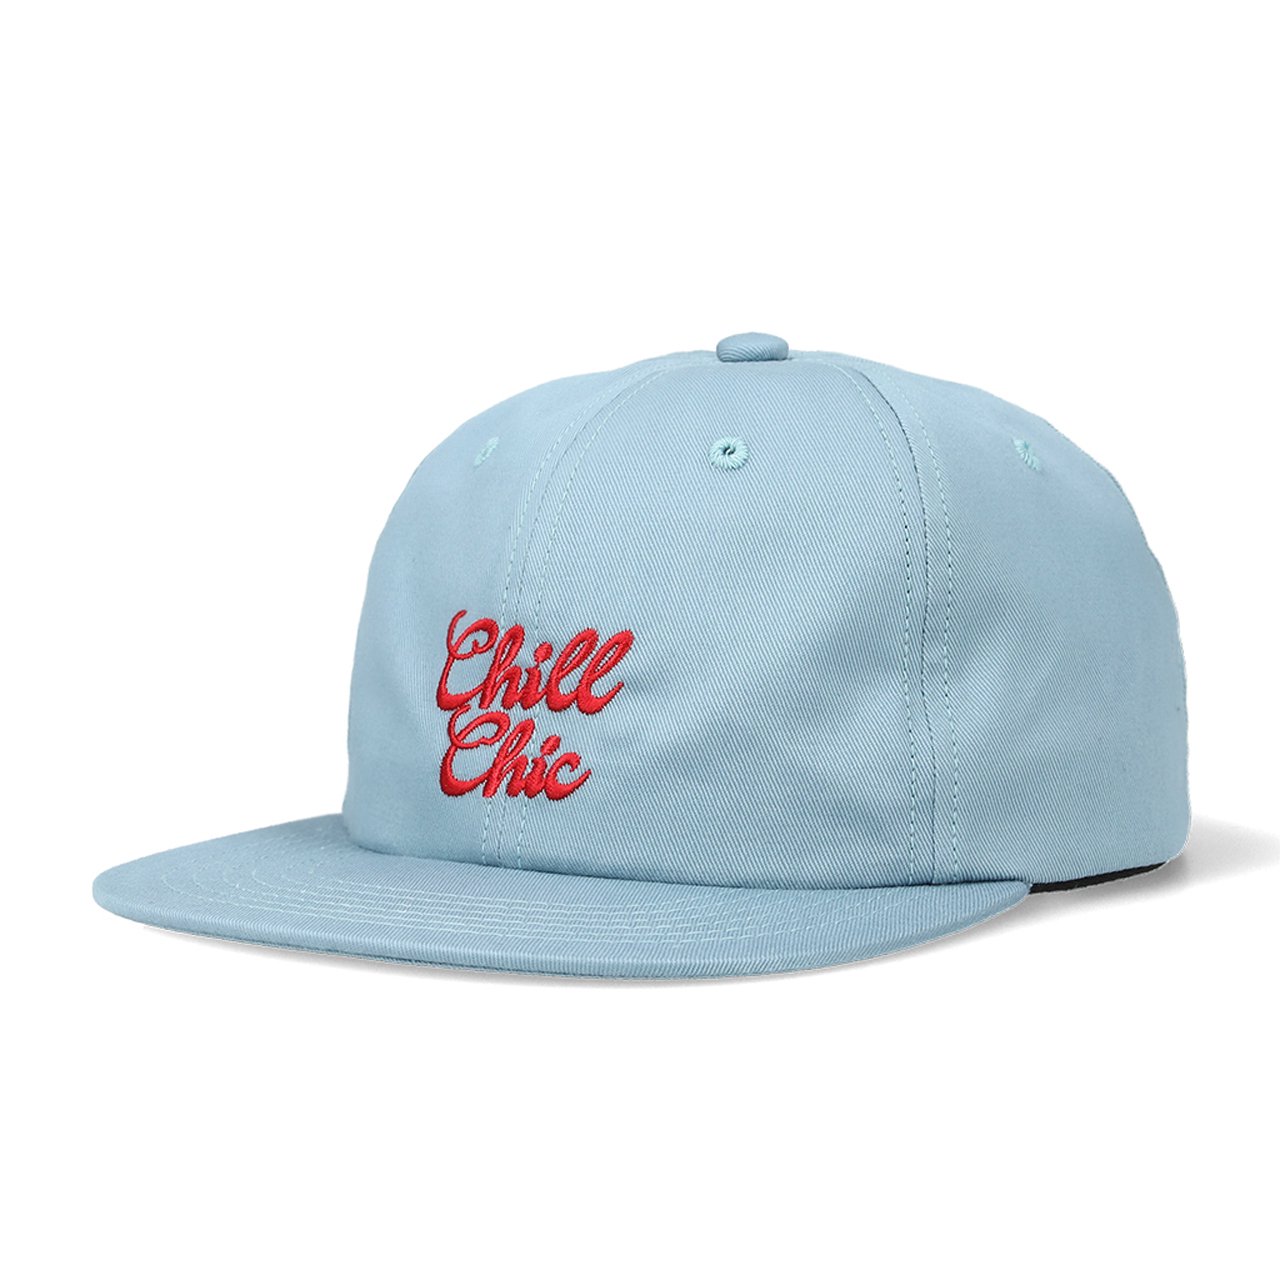 <img class='new_mark_img1' src='https://img.shop-pro.jp/img/new/icons5.gif' style='border:none;display:inline;margin:0px;padding:0px;width:auto;' />STANDARD CALIFORNIA ( ե˥)Chill Chic Twill Cap Blue